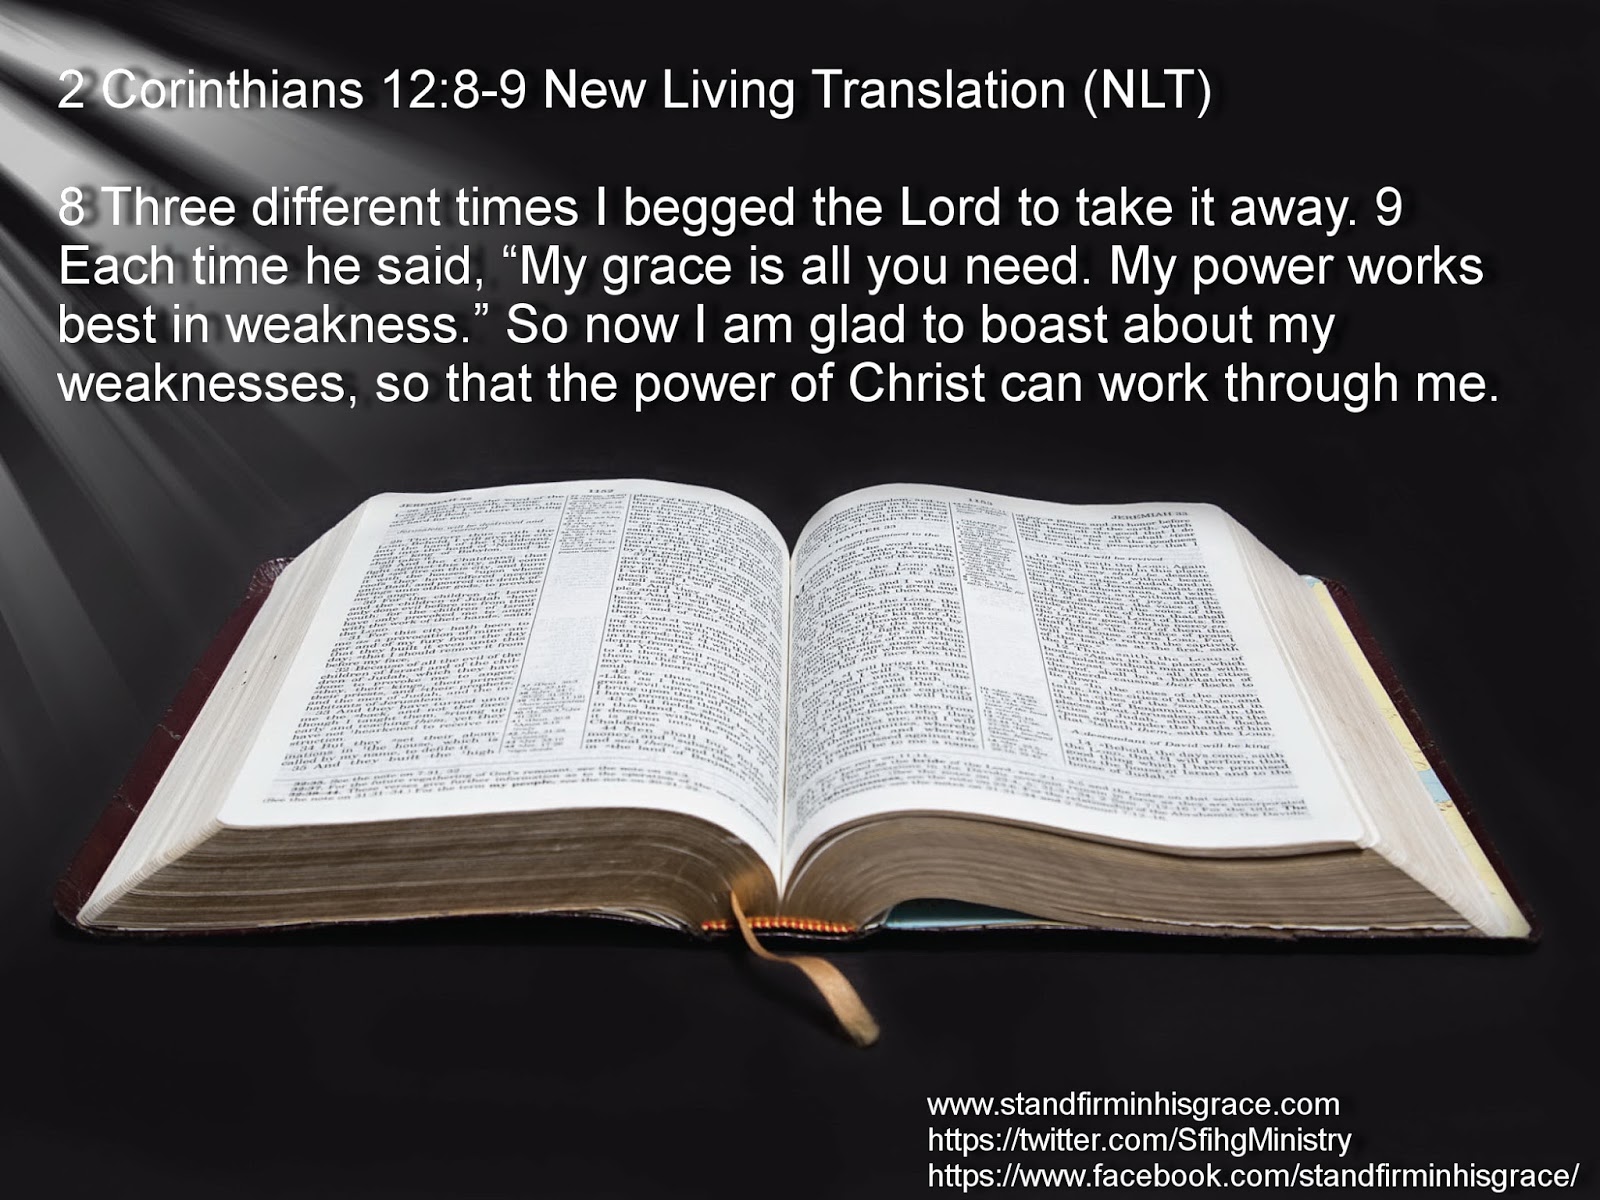 Daily Word of God - 2 Corinthians 12:8-9.